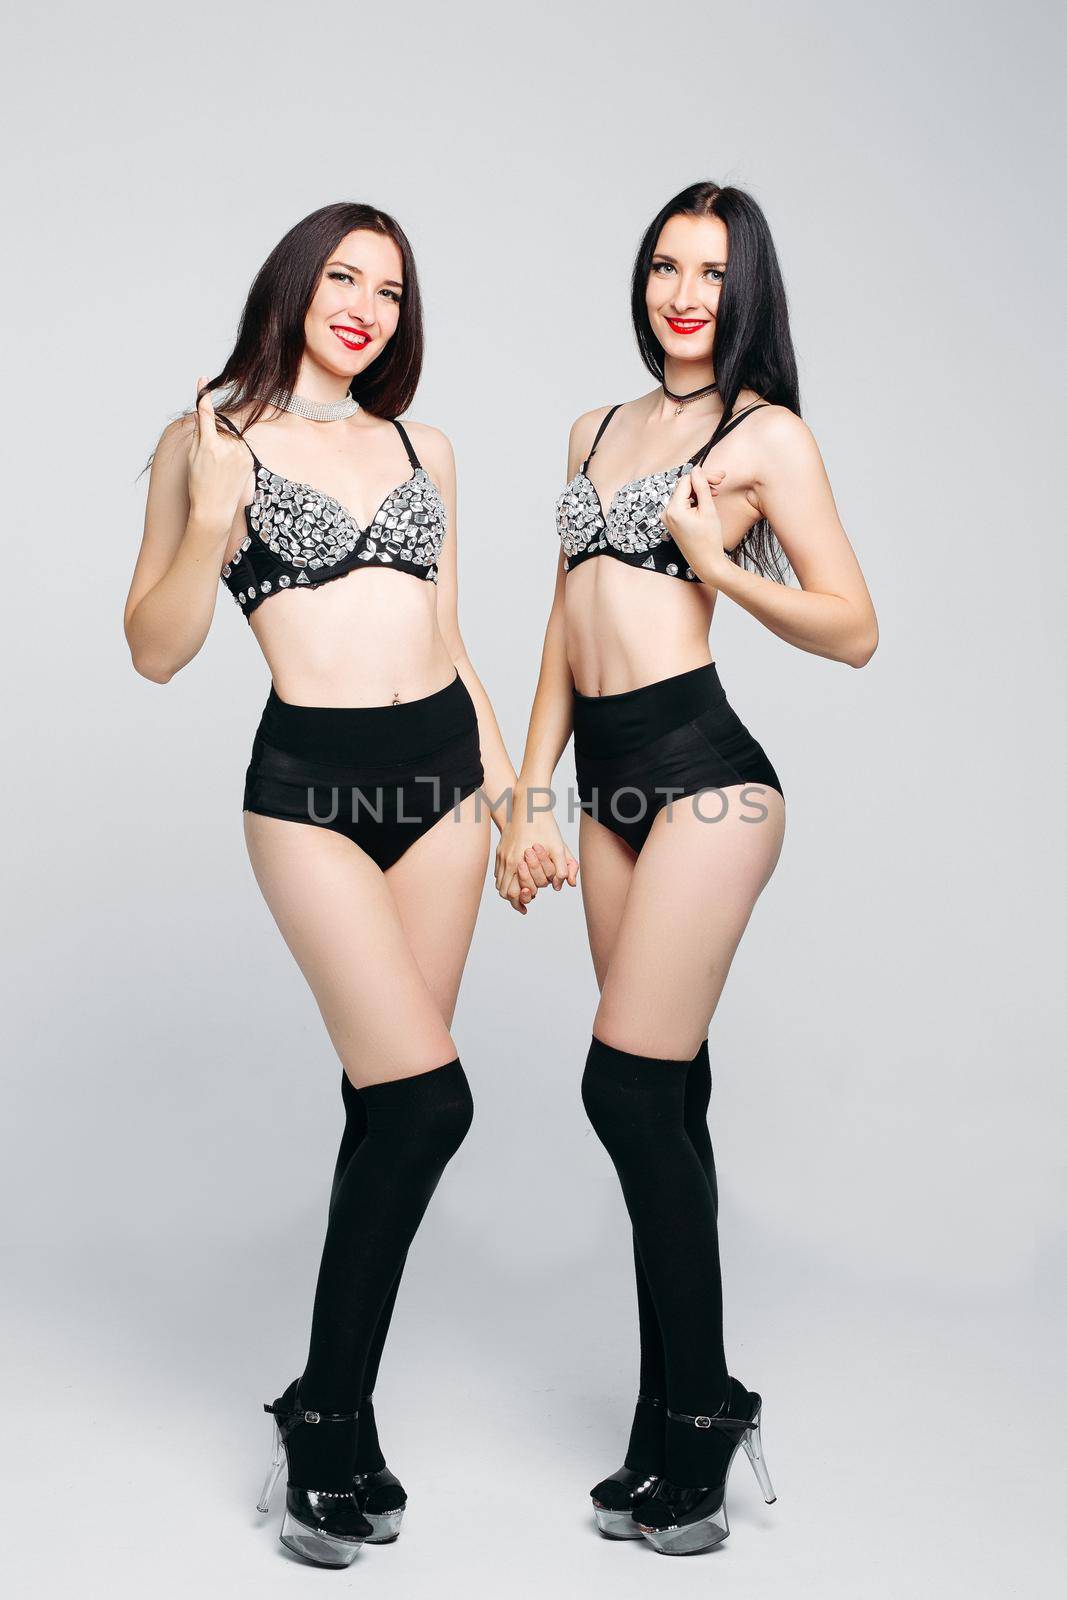 Seductive twins in shine and glamorous lingerie posing with crossed hands. by StudioLucky